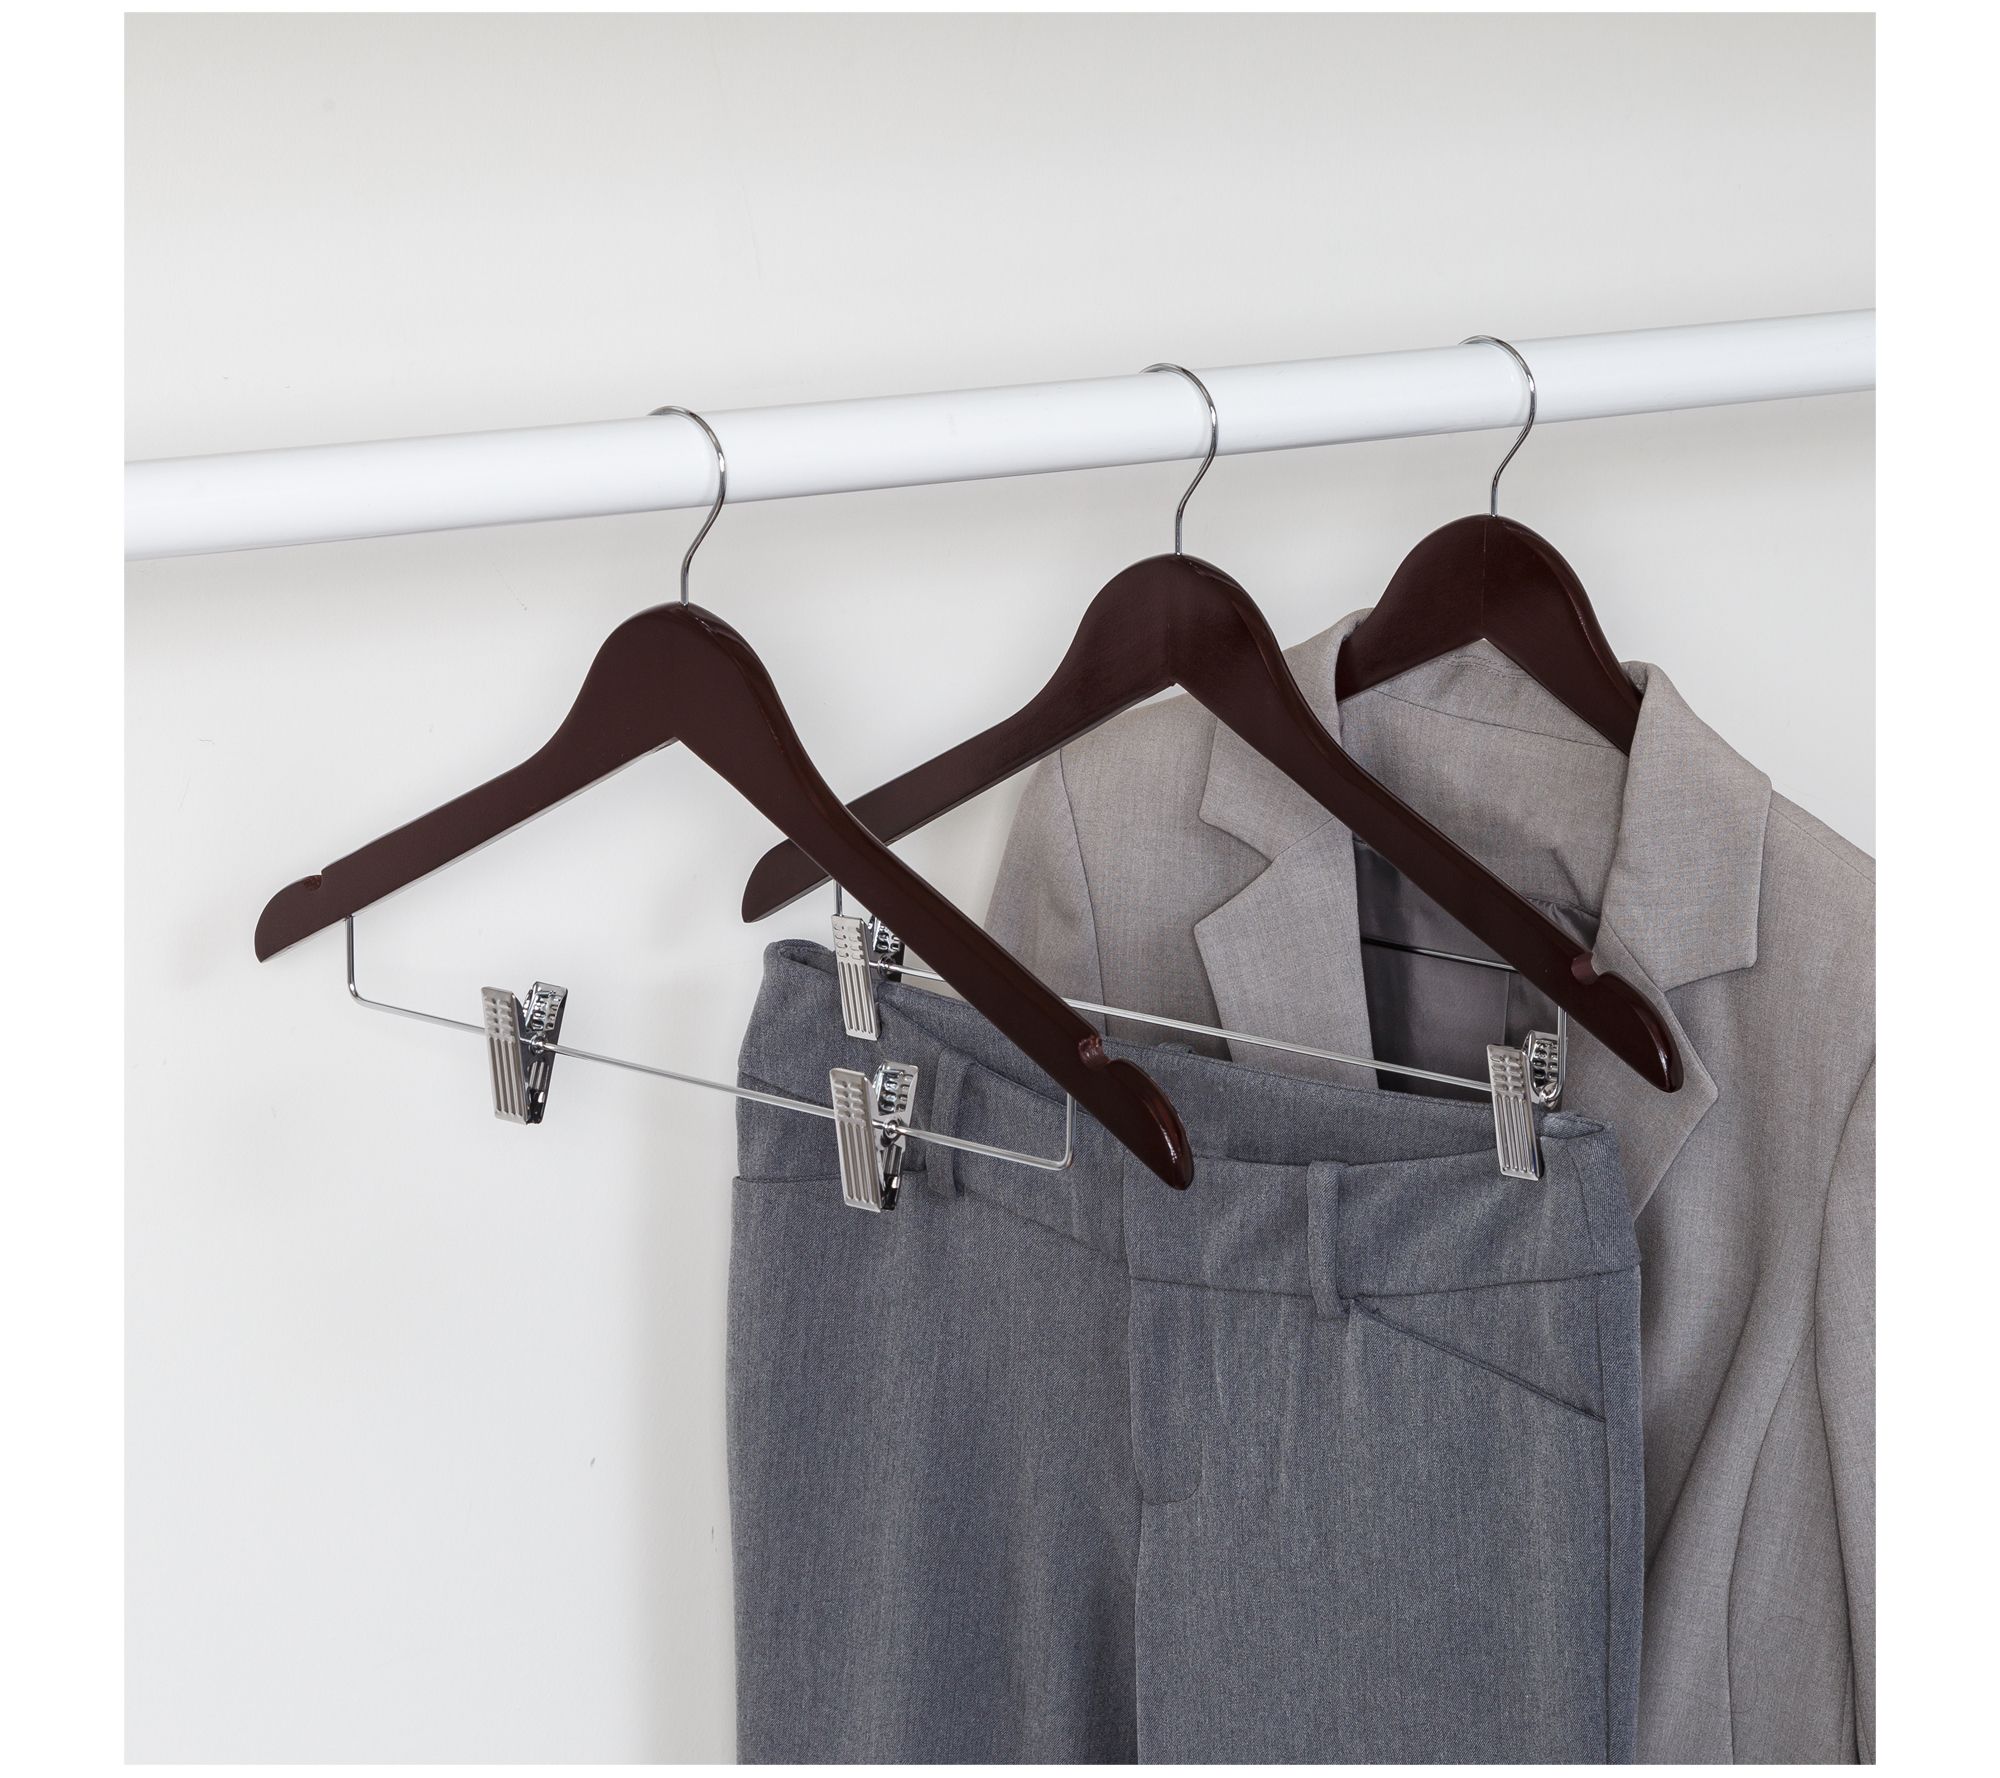 Honey Can Do Maple Hotel Suit Hangers (24-Pack)